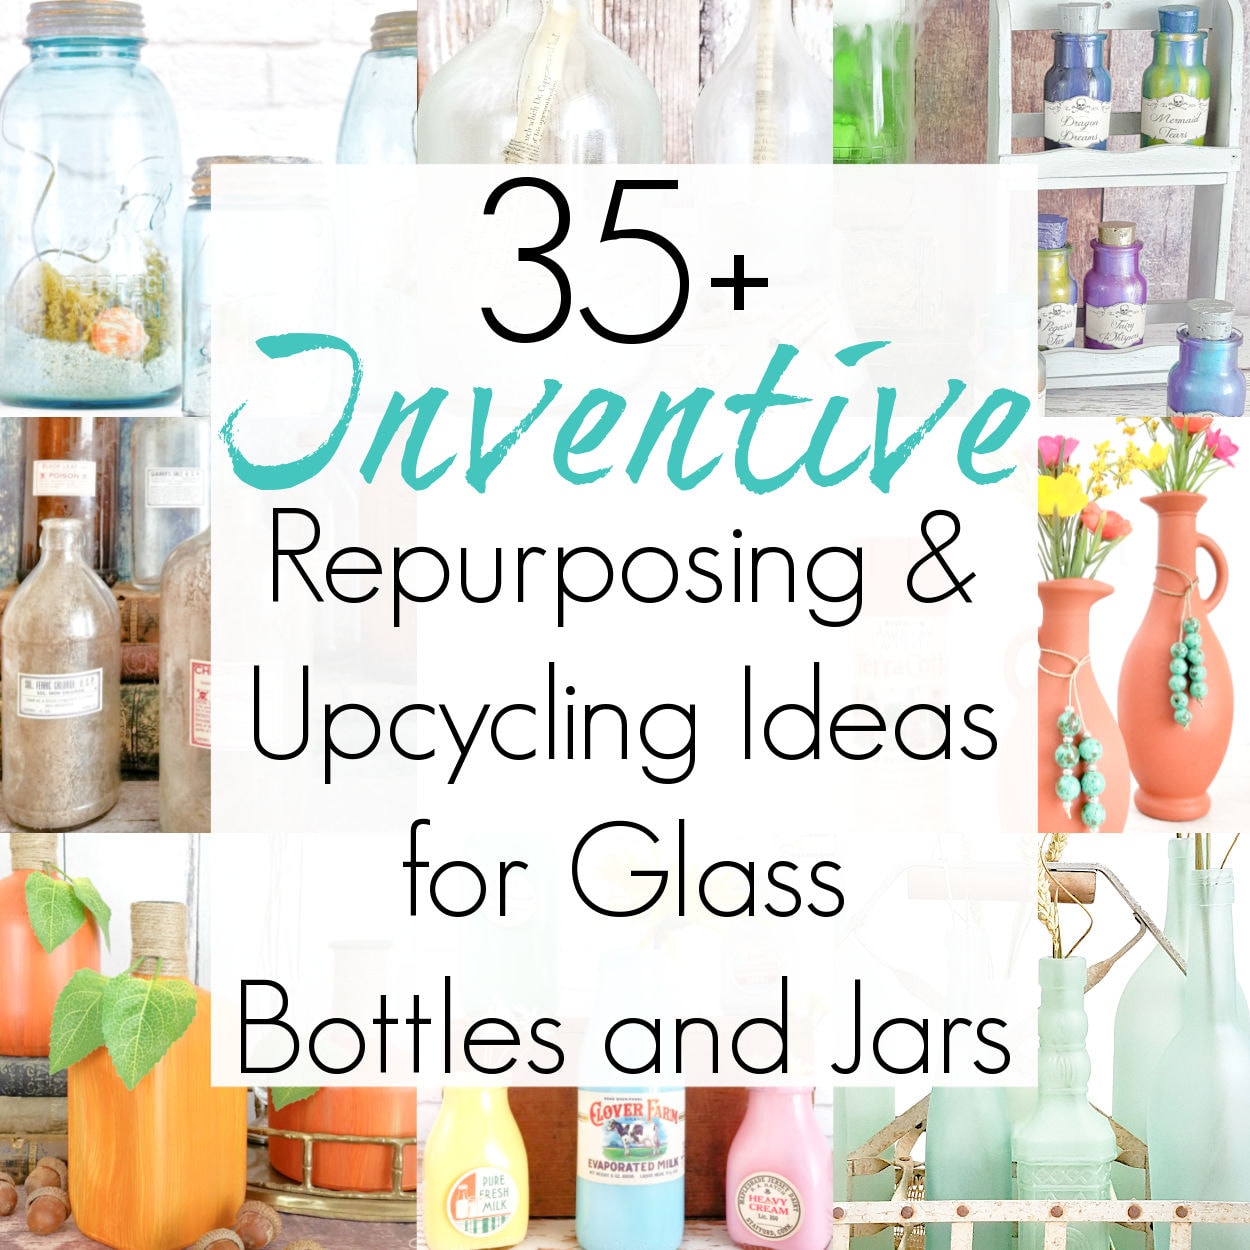 Glass Bottle Crafts and Upcycling Ideas